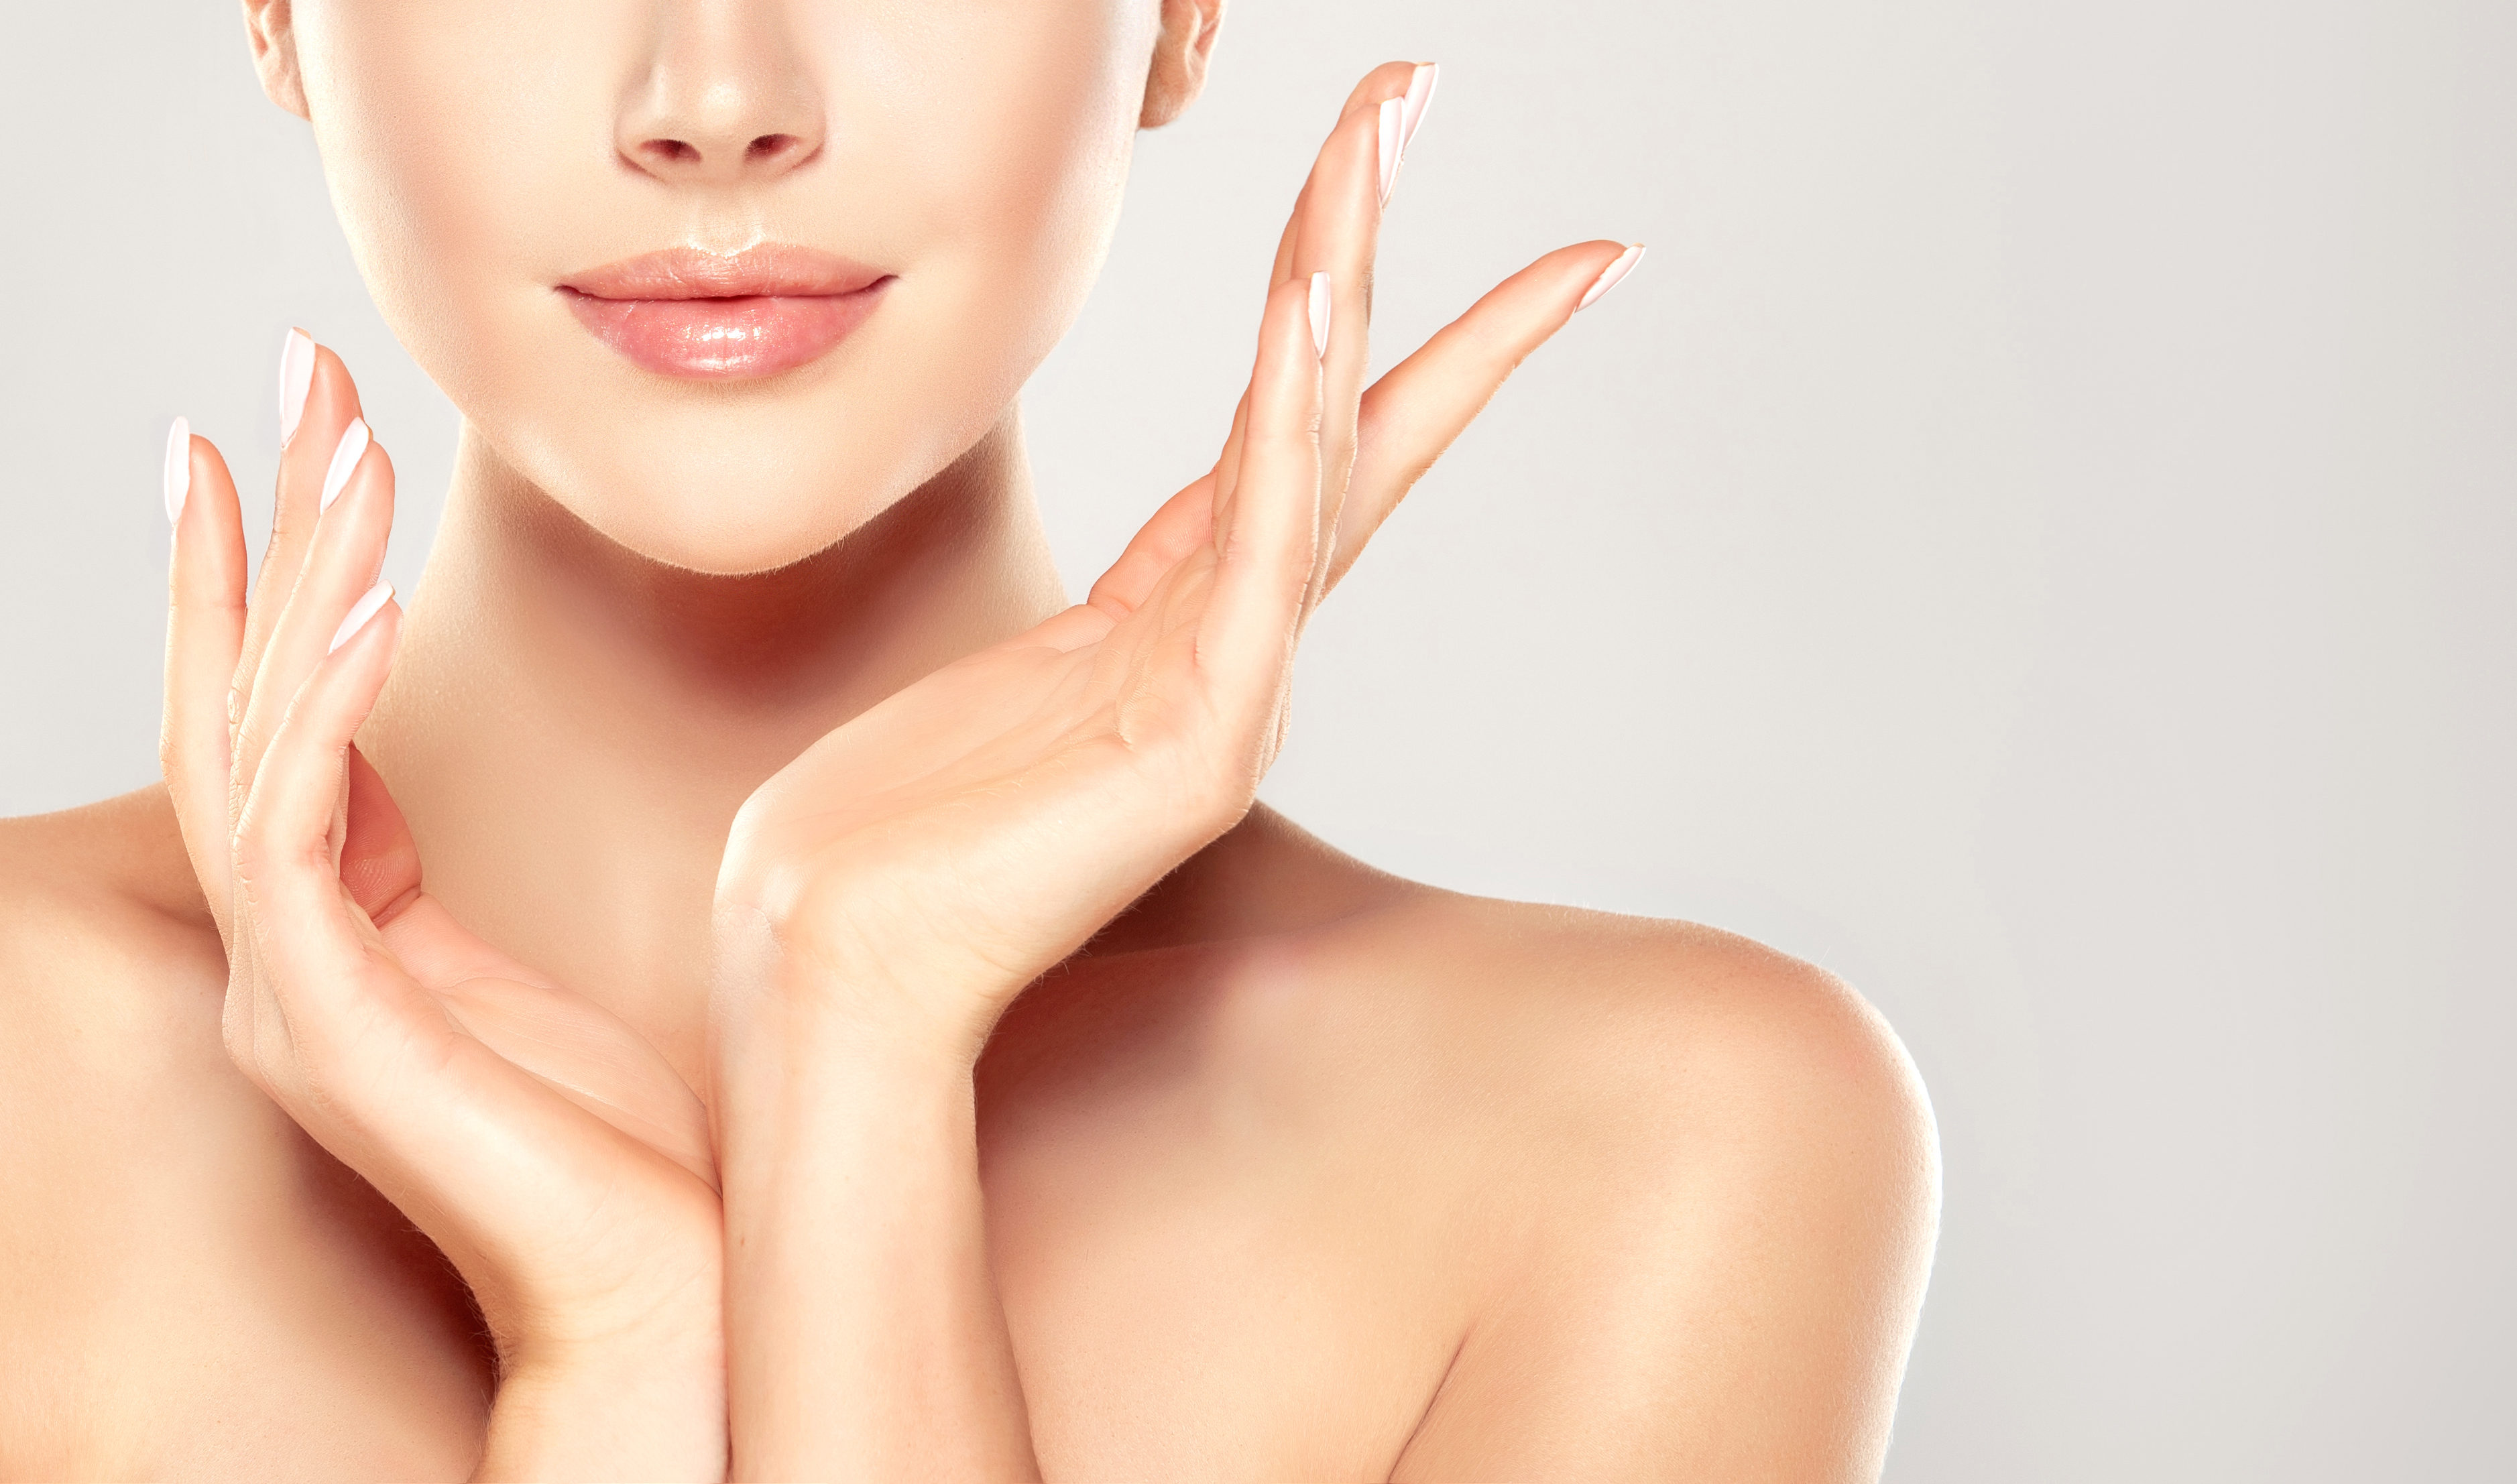 What Are the Latest Trends in Facial Reshaping Surgery?